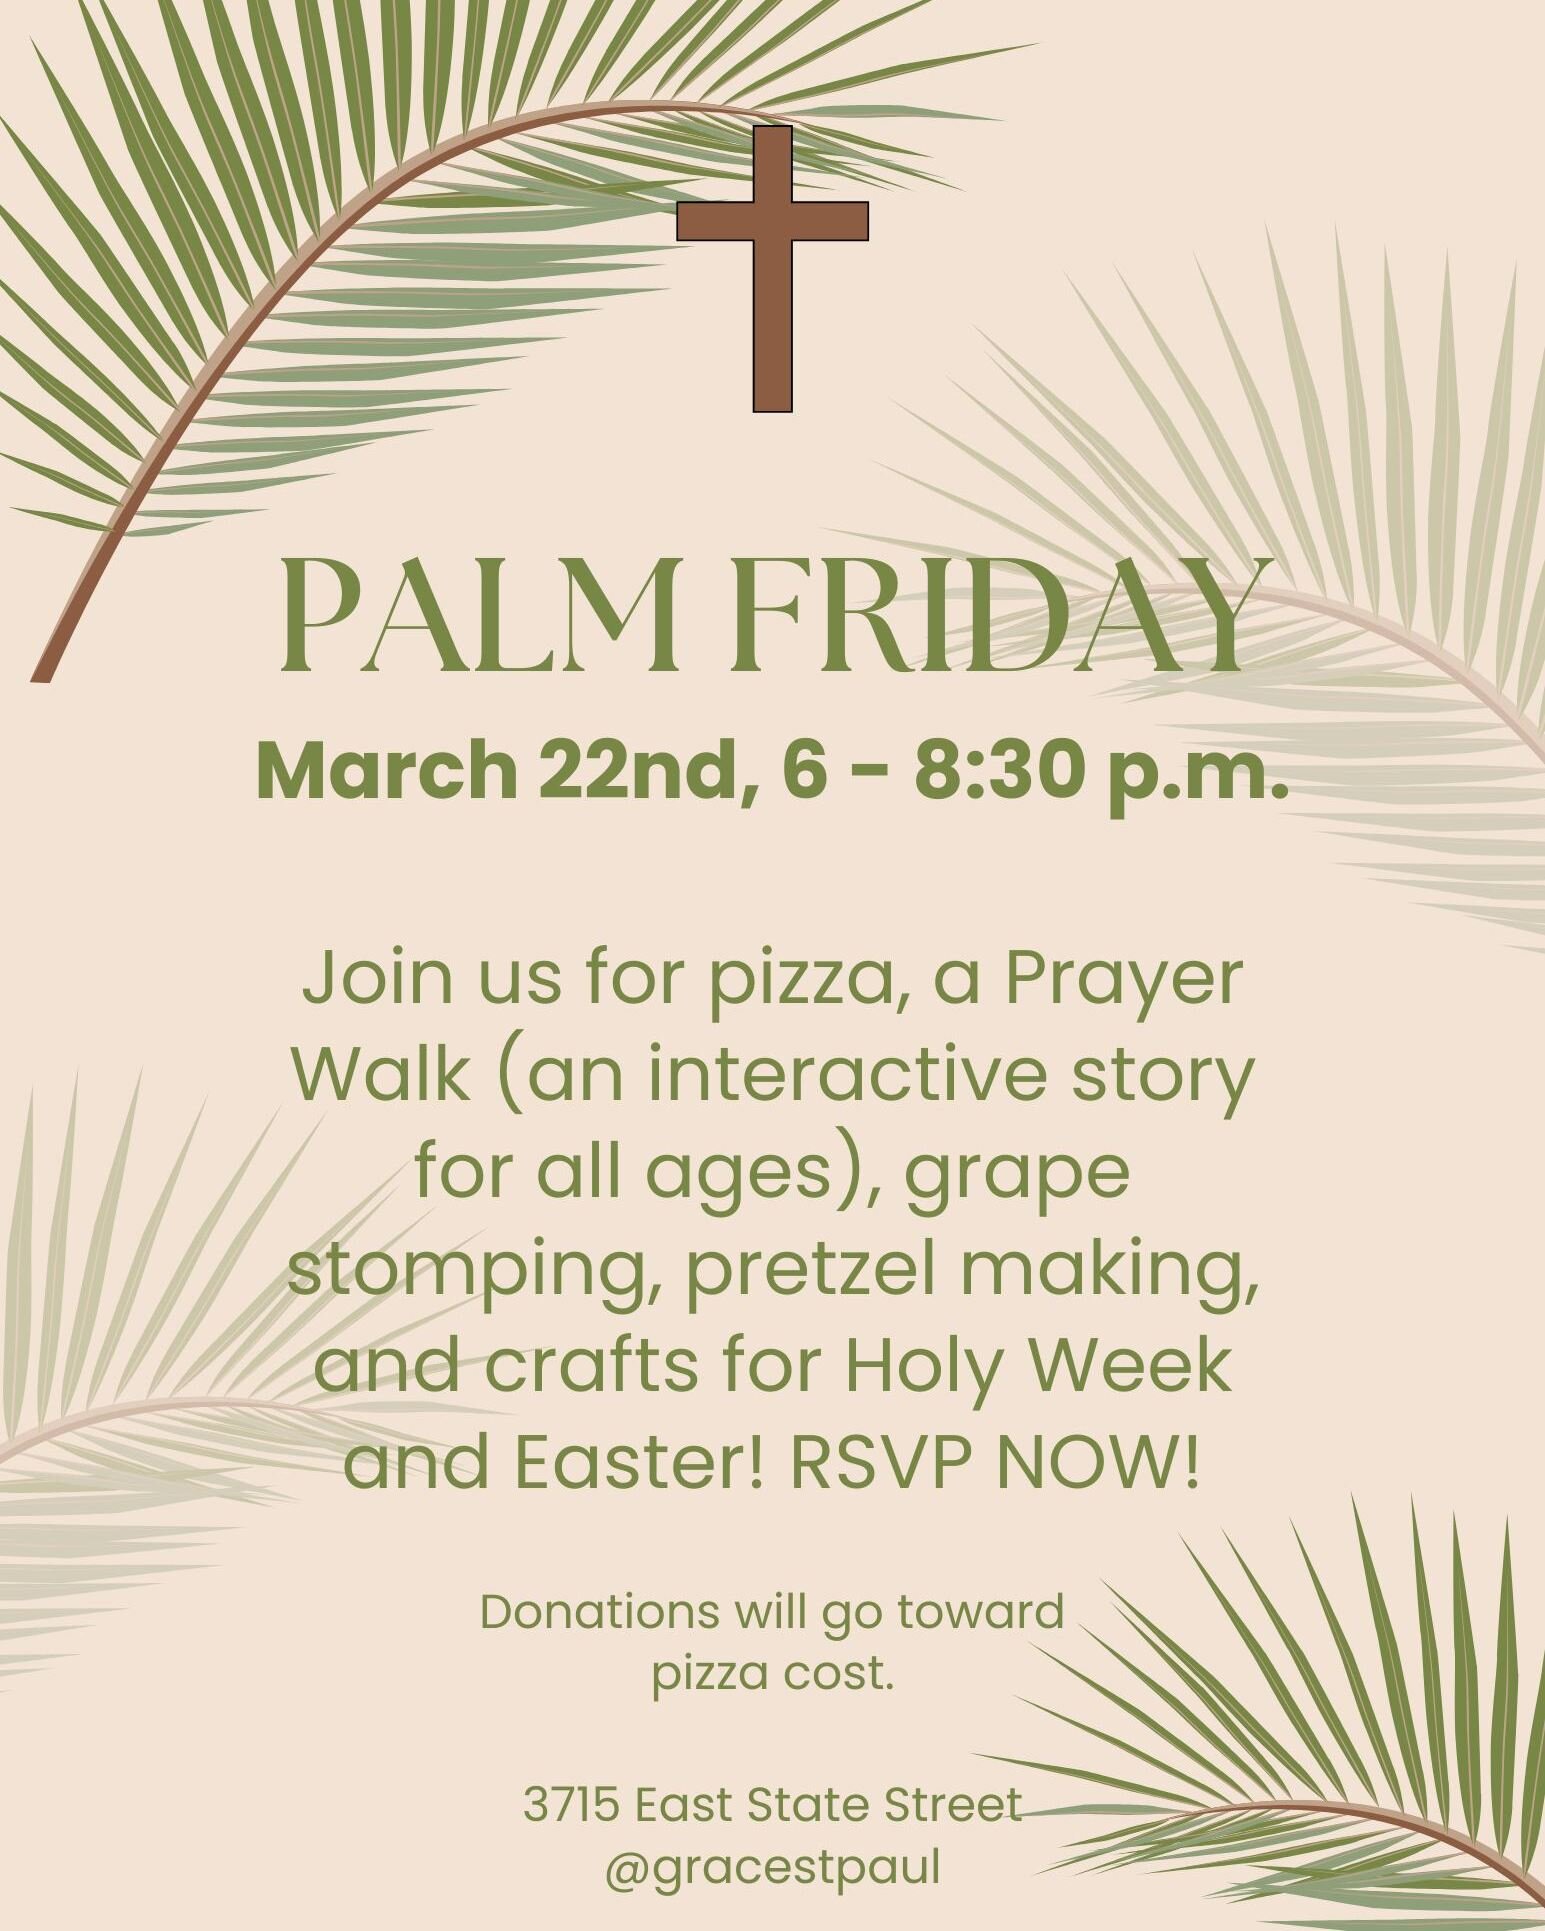 Join us on March 22nd for our annual Palm Friday event! We will be having pizza at 6 pm, followed by the Prayer Walk at 6:30. We hope to see you then, the RSVP link is in our linktree in bio.